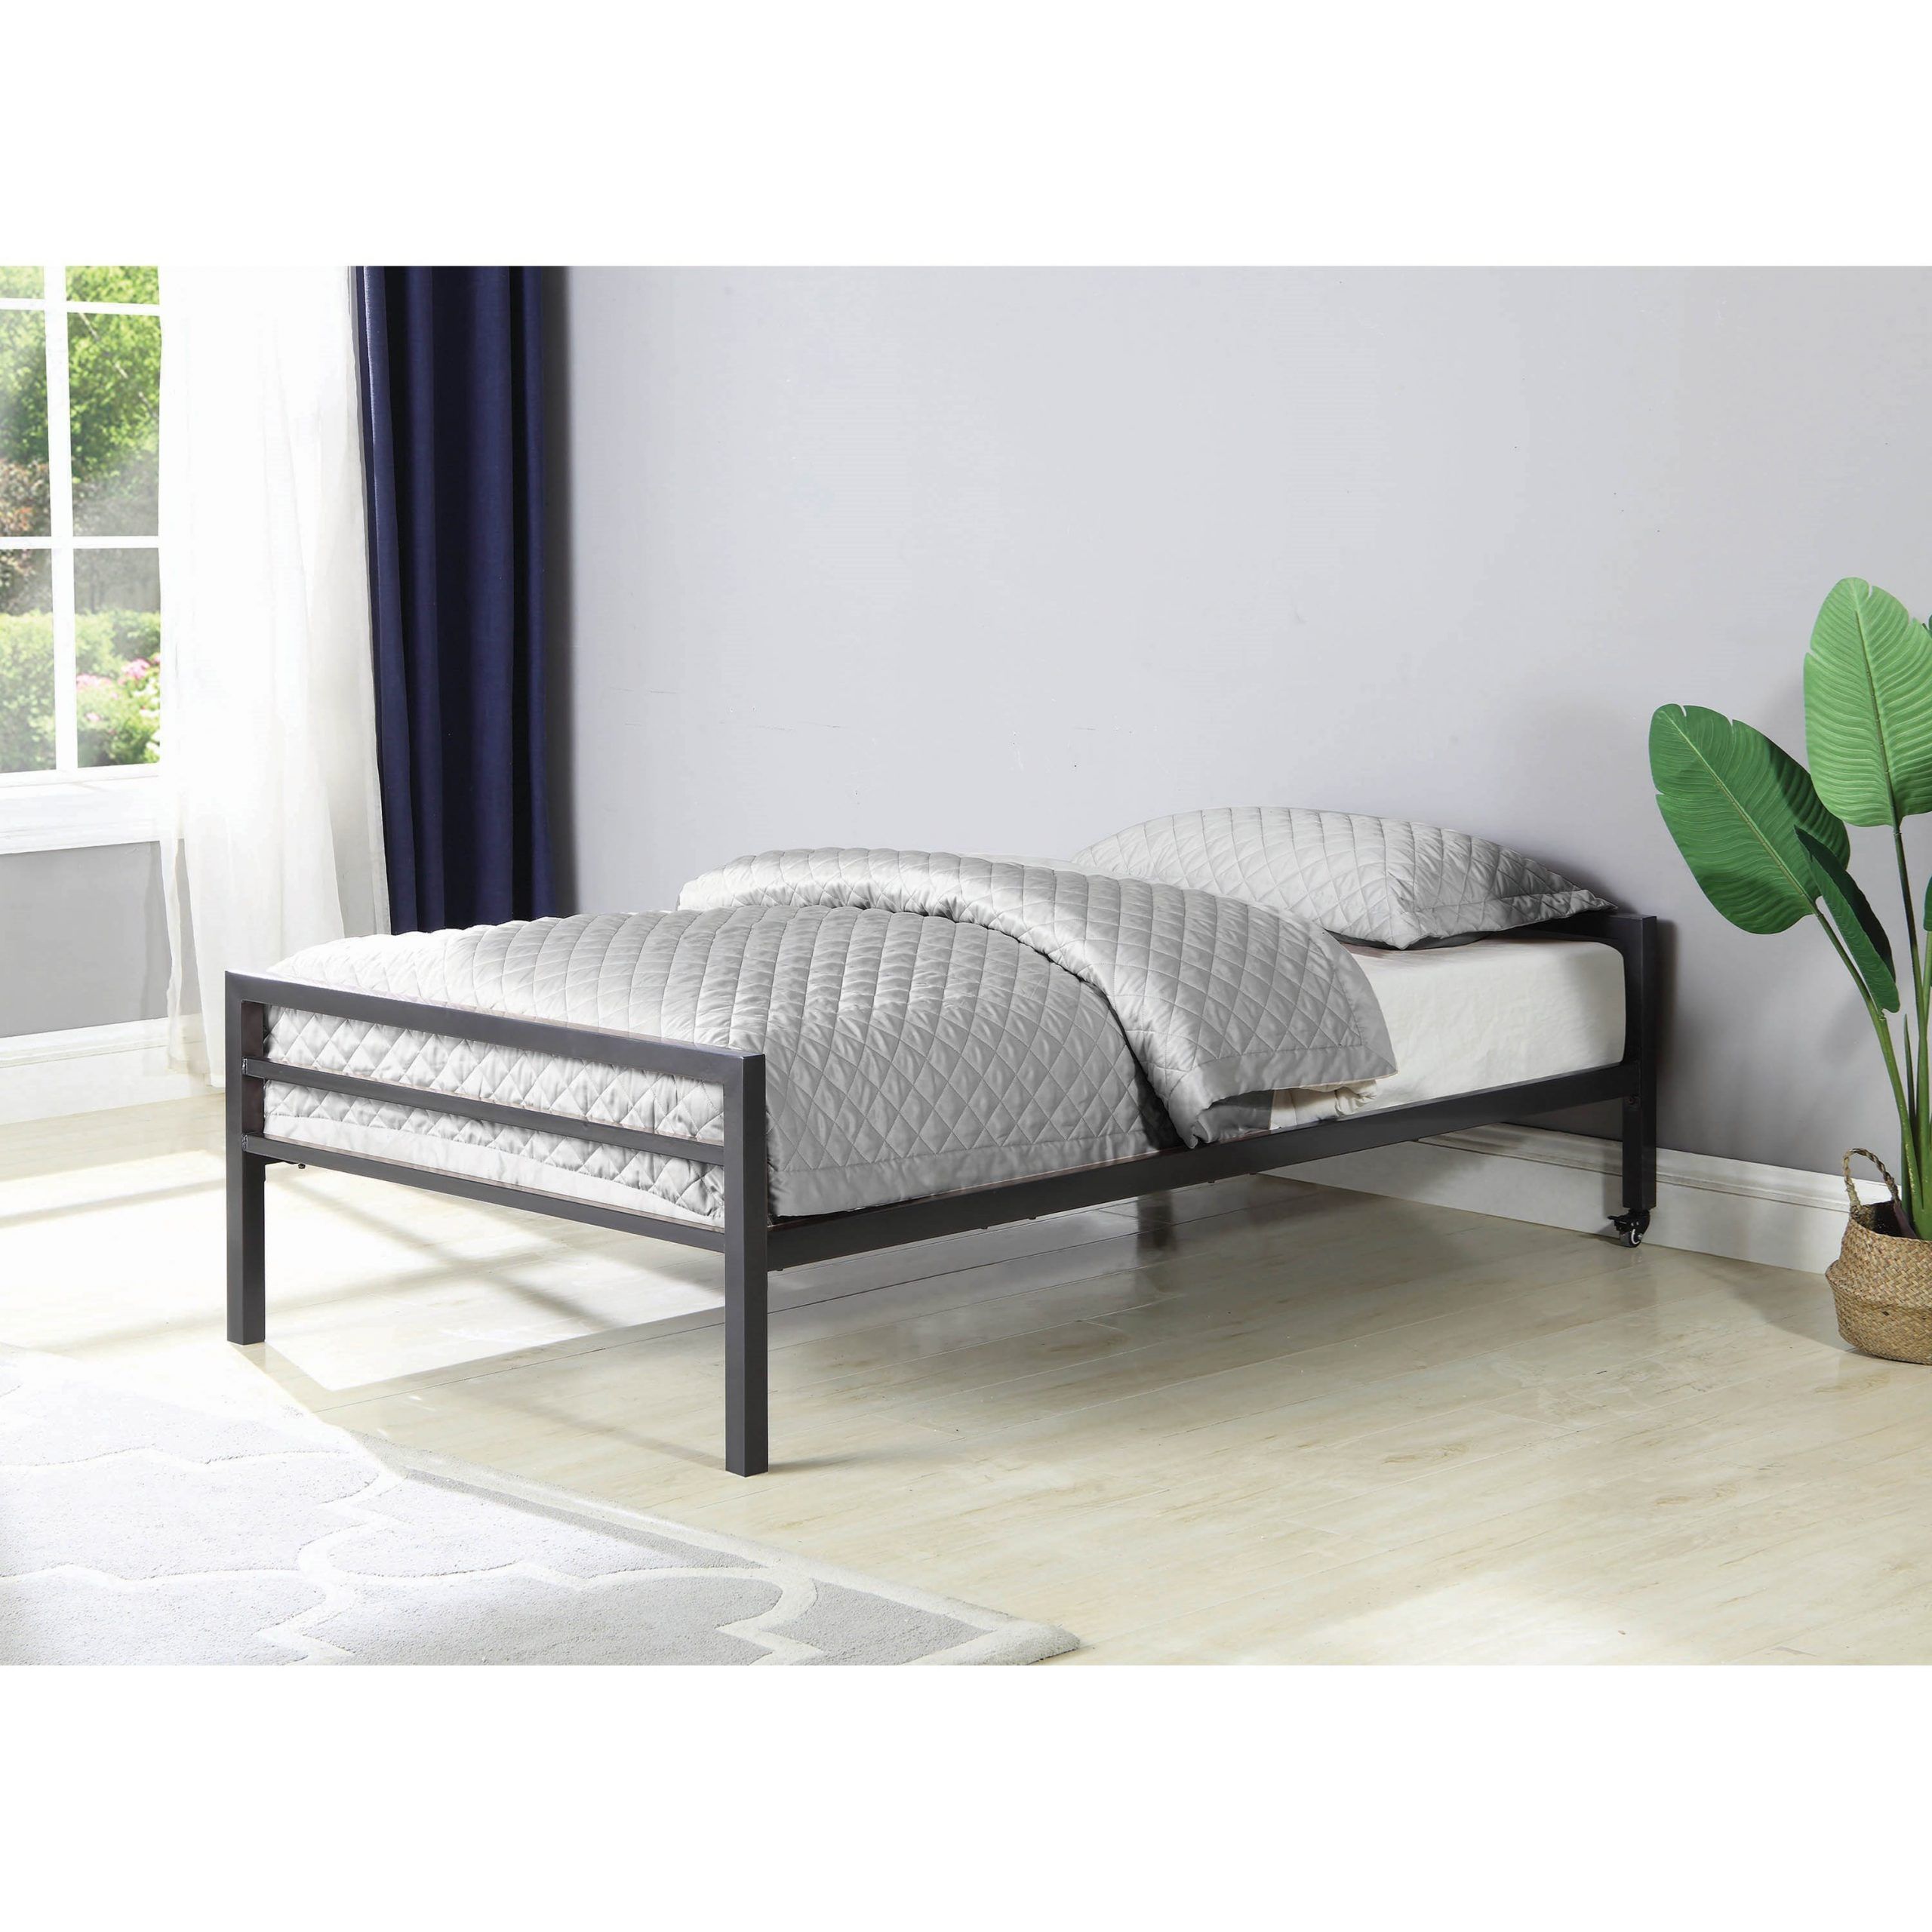 Coaster Hadley Metal Twin Bed | A1 Furniture & Mattress For Hadley Small Space Sectional Futon Sofas (View 12 of 15)